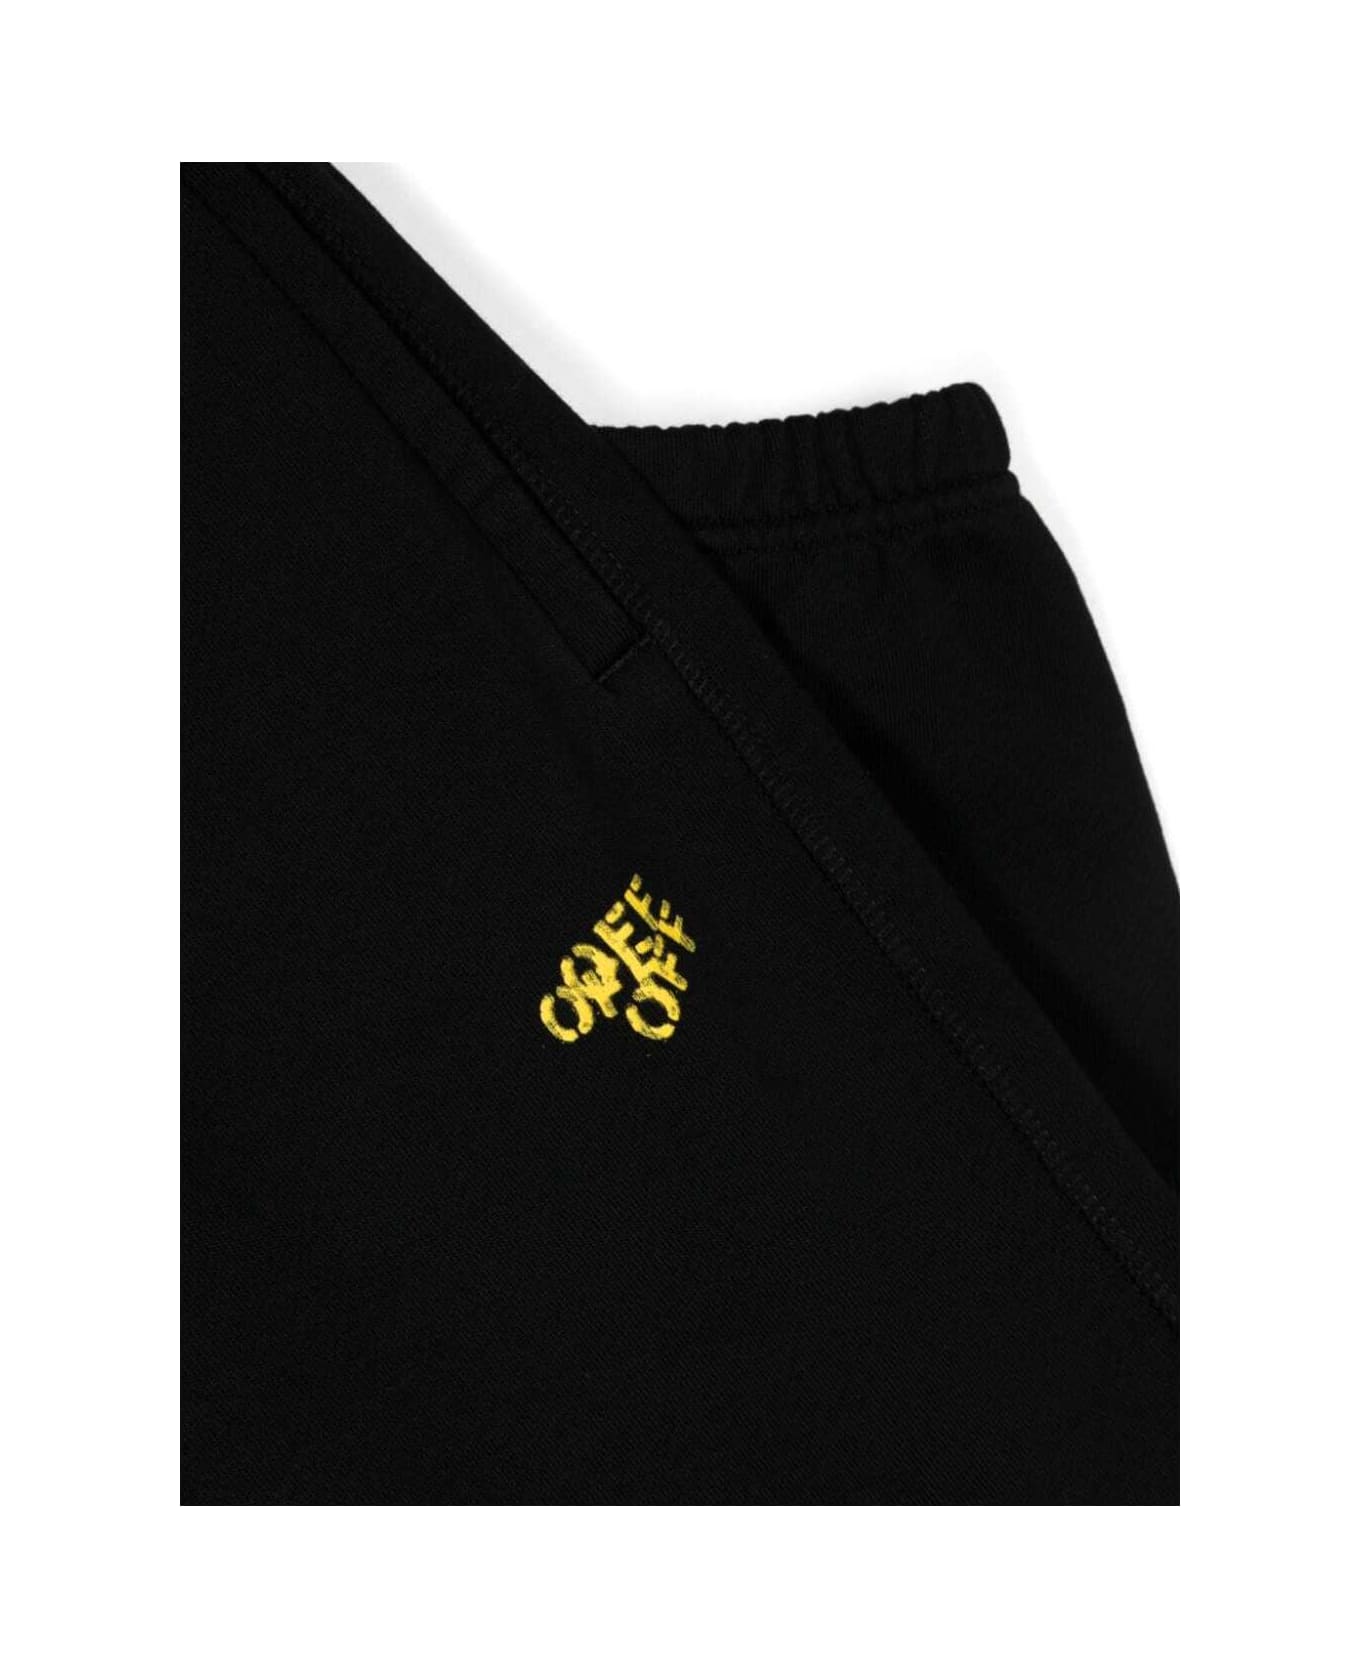 Off-White Black Jogger Pants With Logo In Cotton Boy - Black